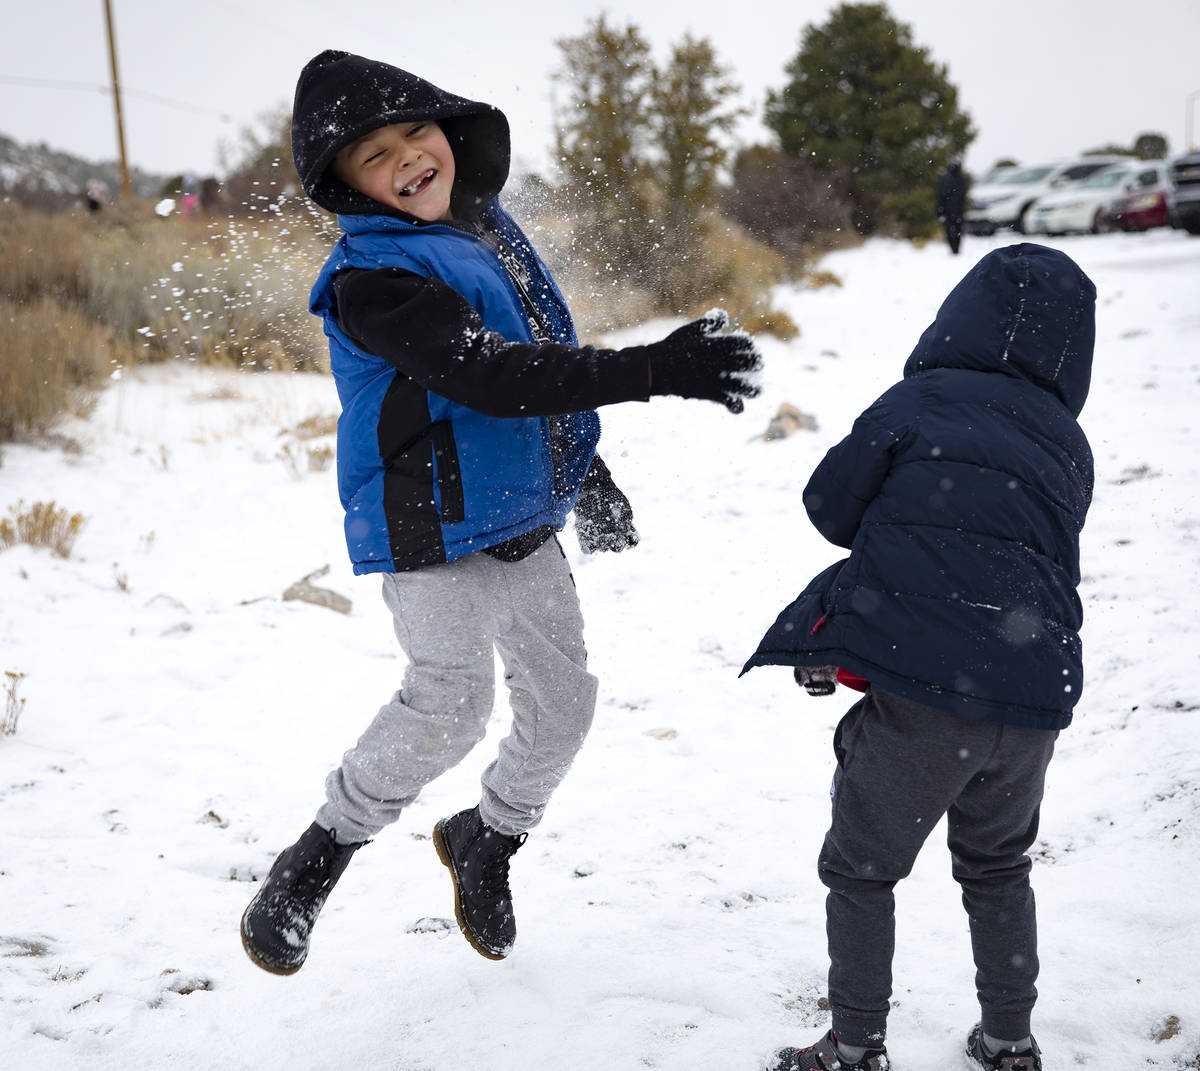 Aaron Vasquez, 8, is hit with a snowball while playing with his brothers at Mt. Charleston, Sun ...